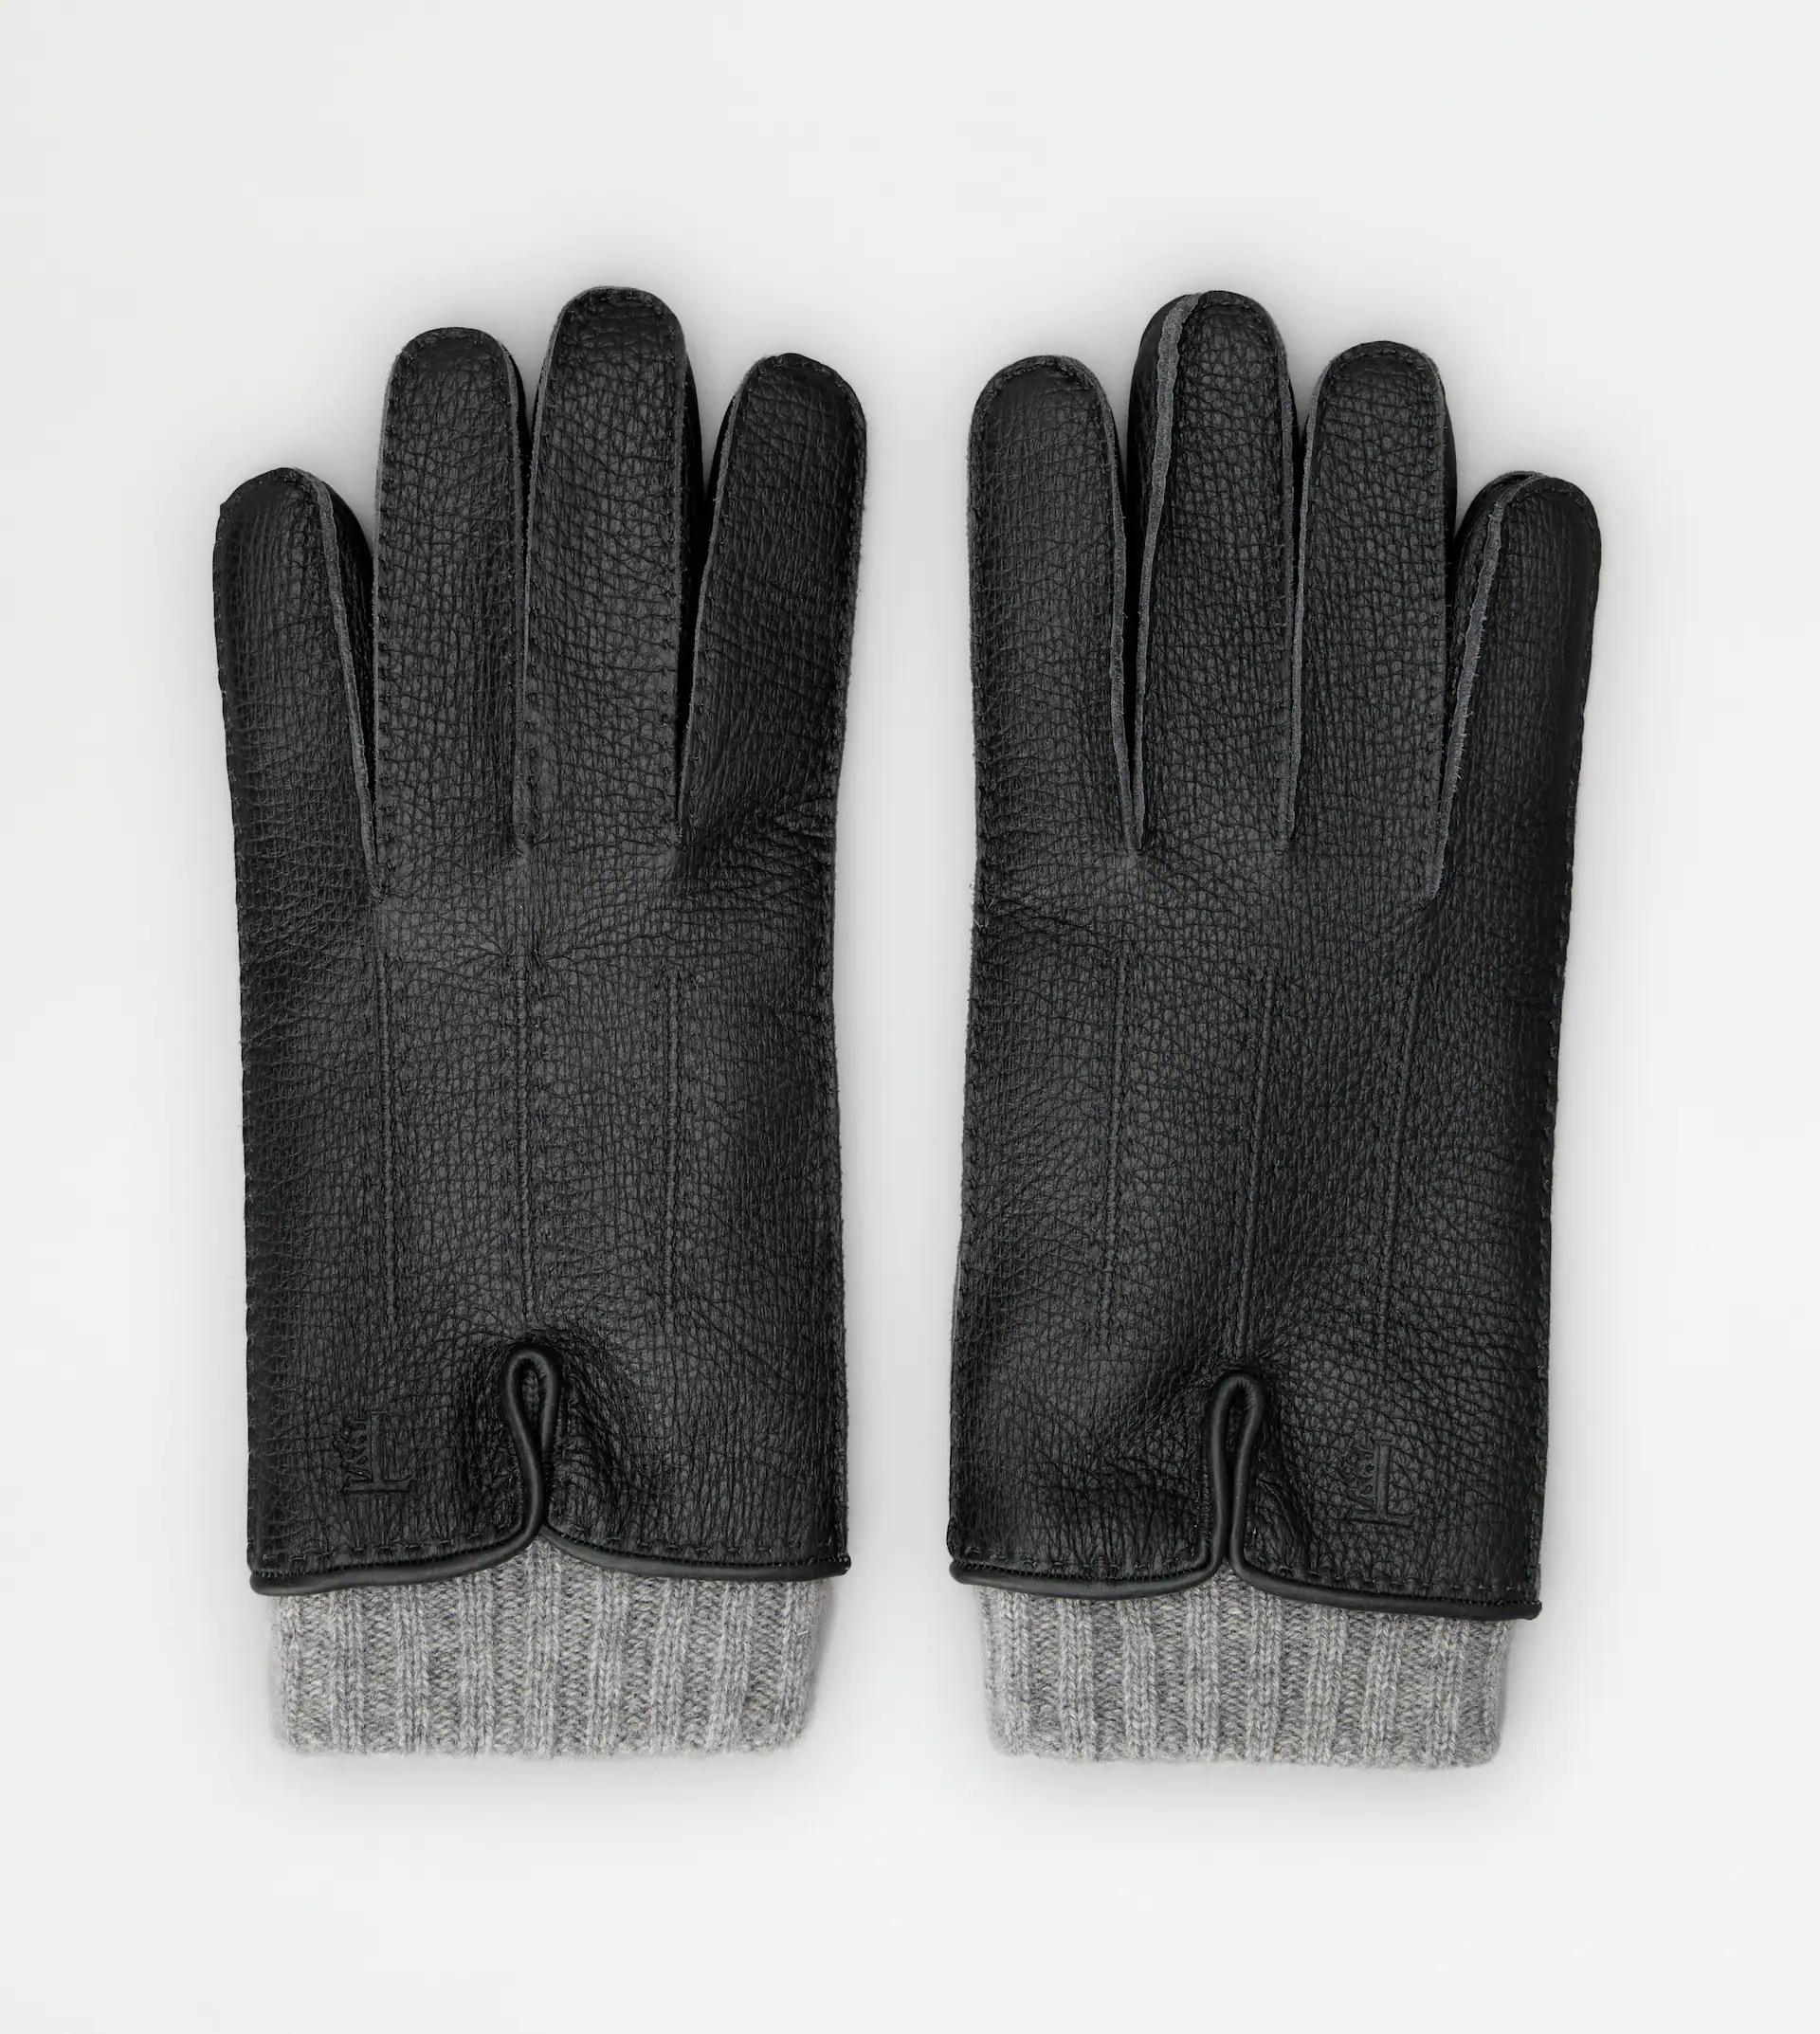 TOD'S GLOVES IN LEATHER AND CASHMERE - BLACK, GREY, ORANGE - 1